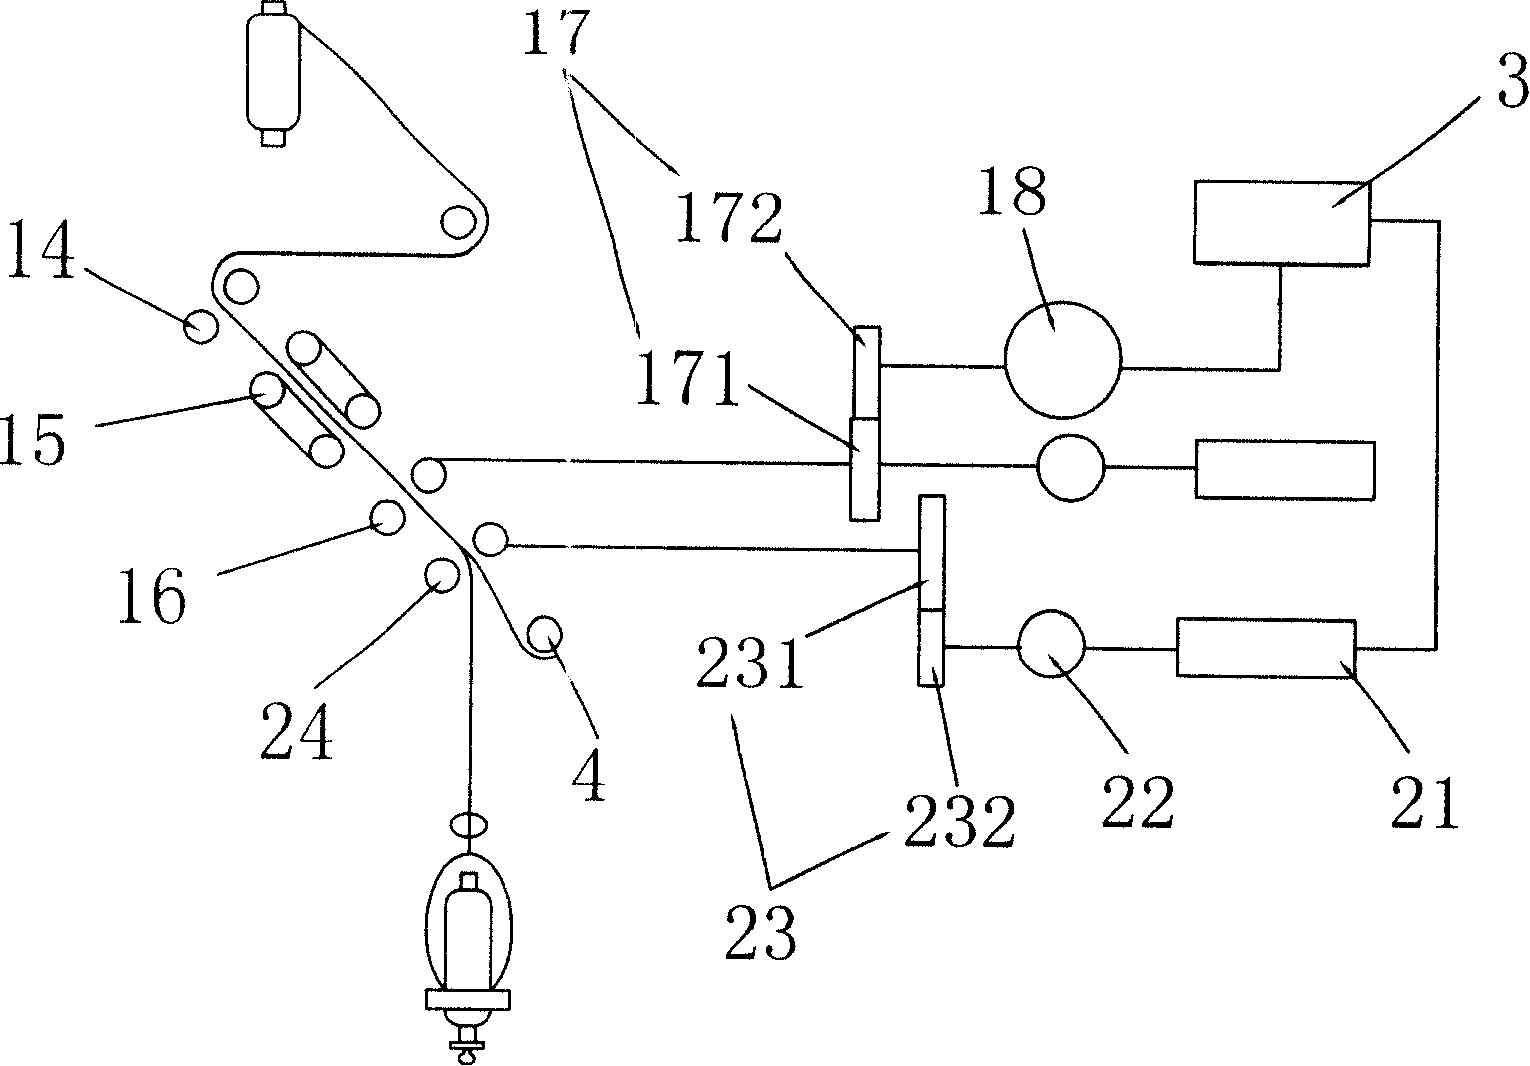 Fourth roller speed automatic regulating device